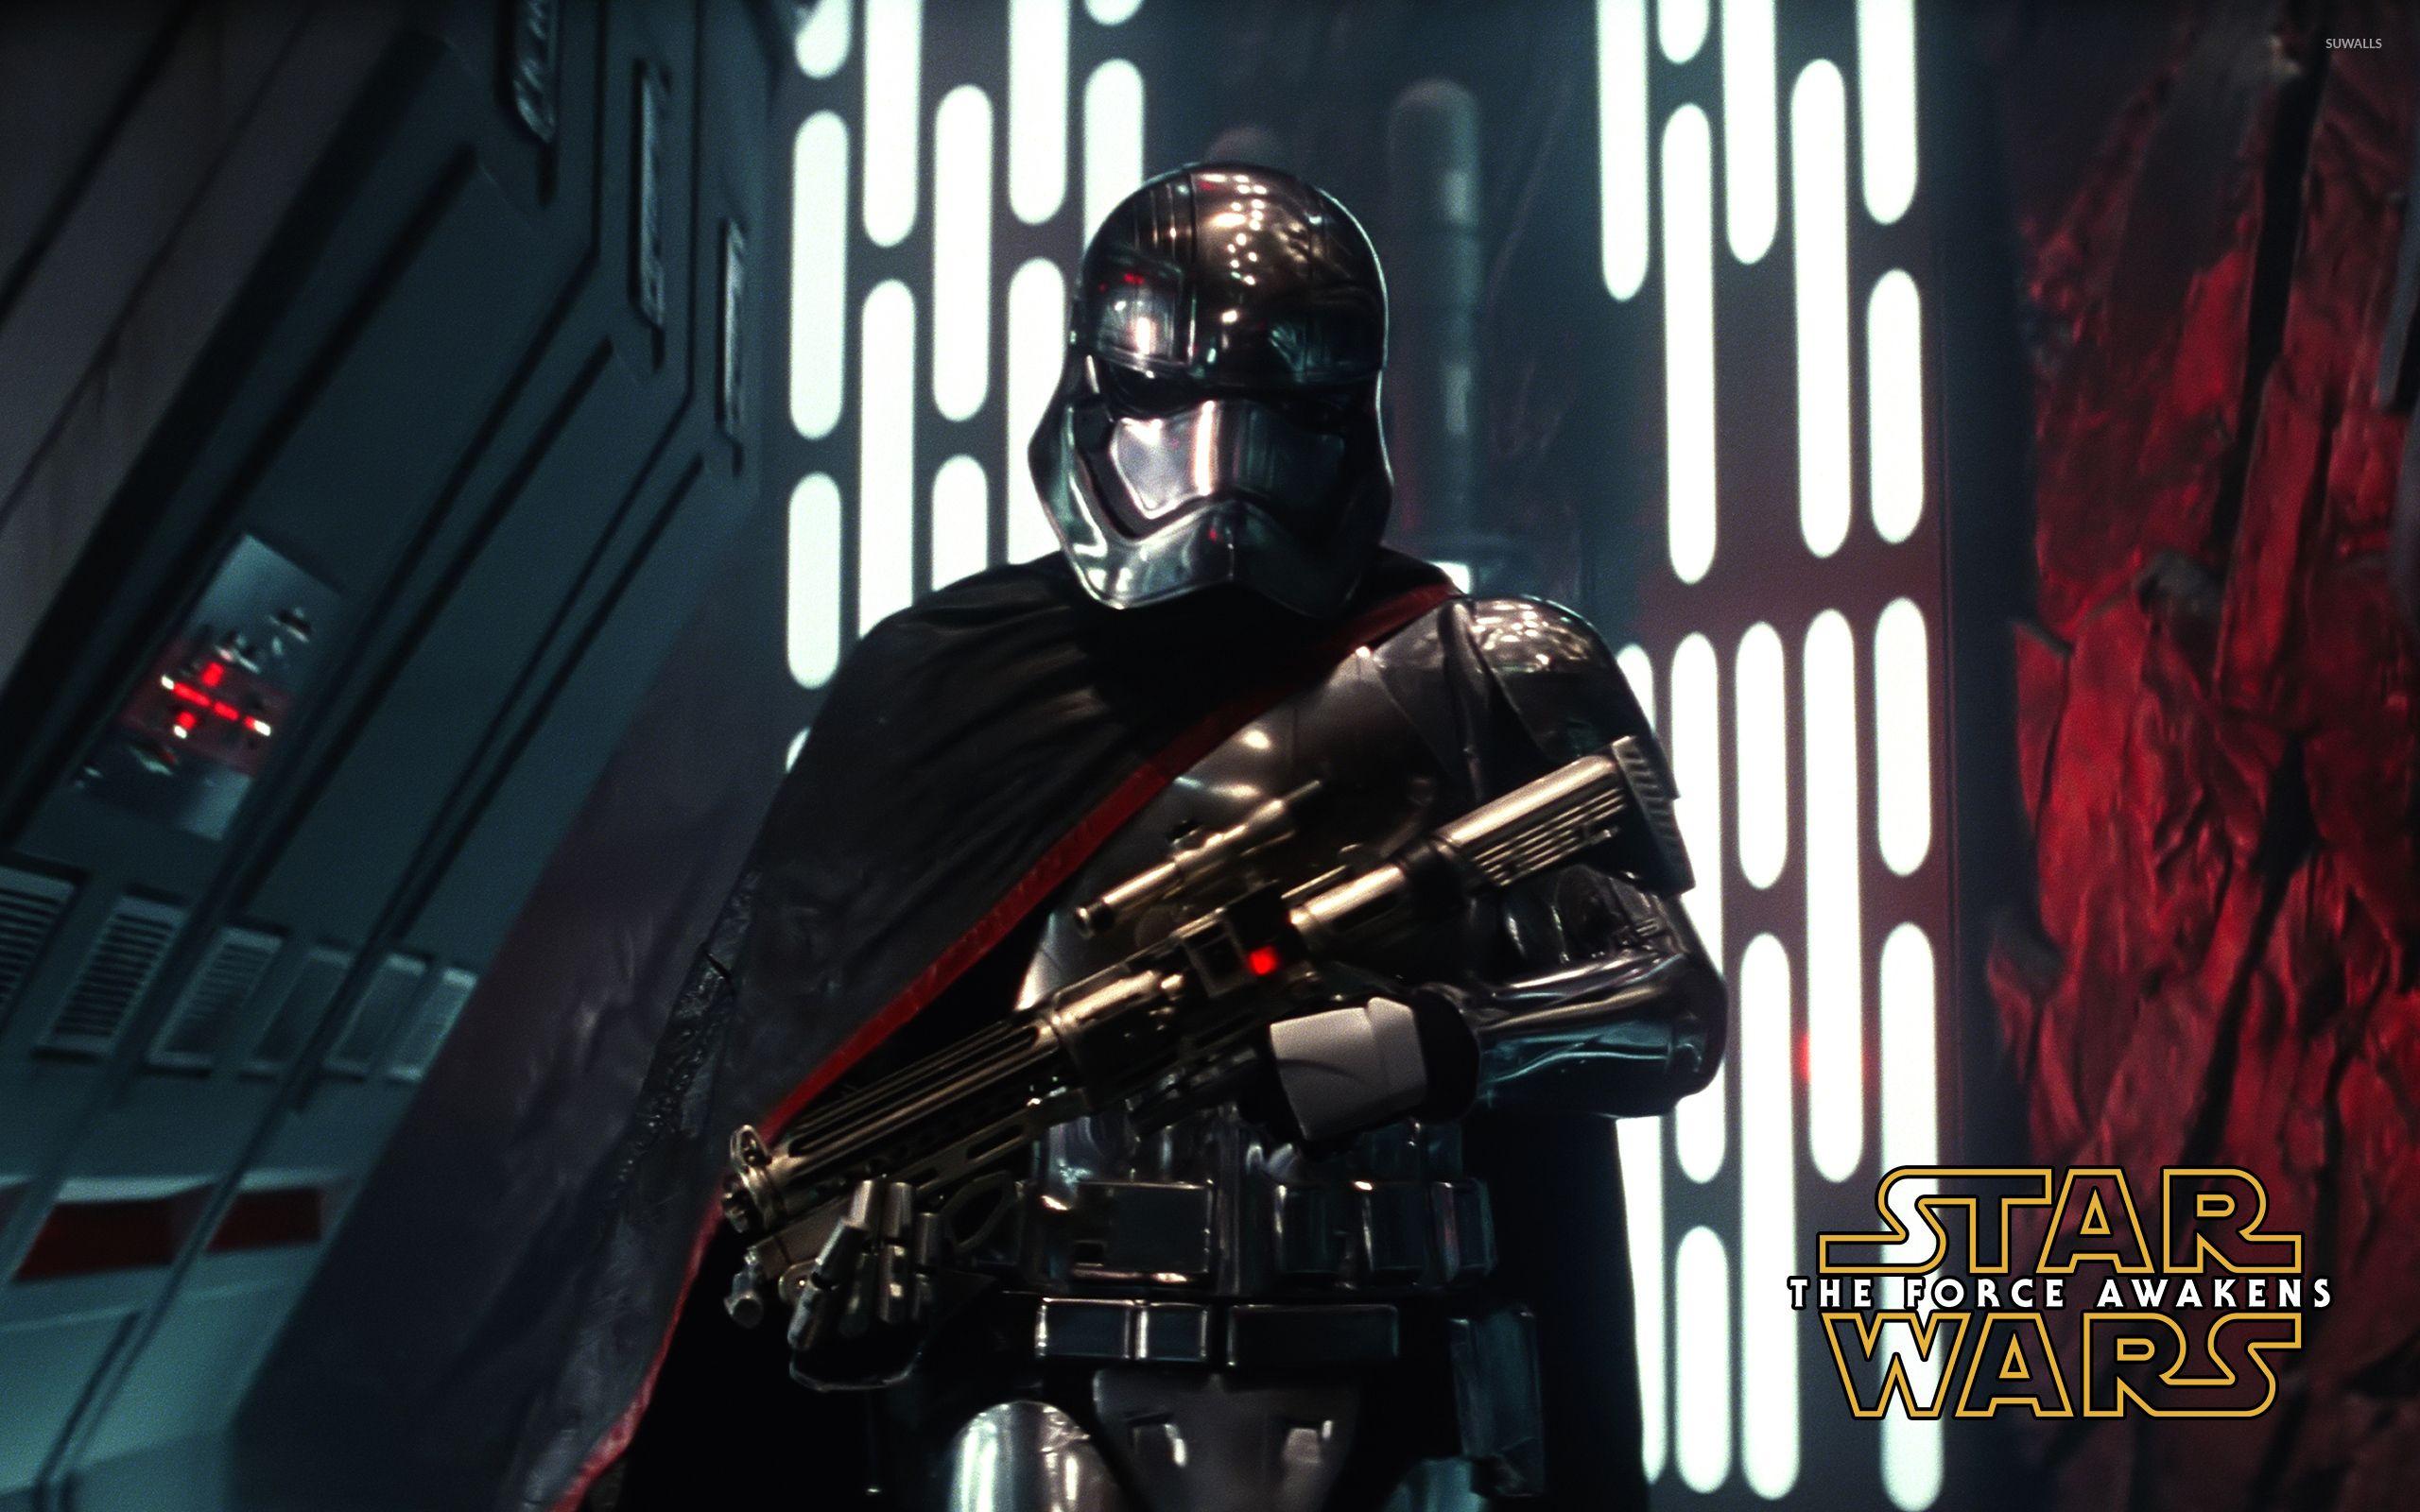 Captain Phasma with a gun Wars: The Force Awakens wallpaper